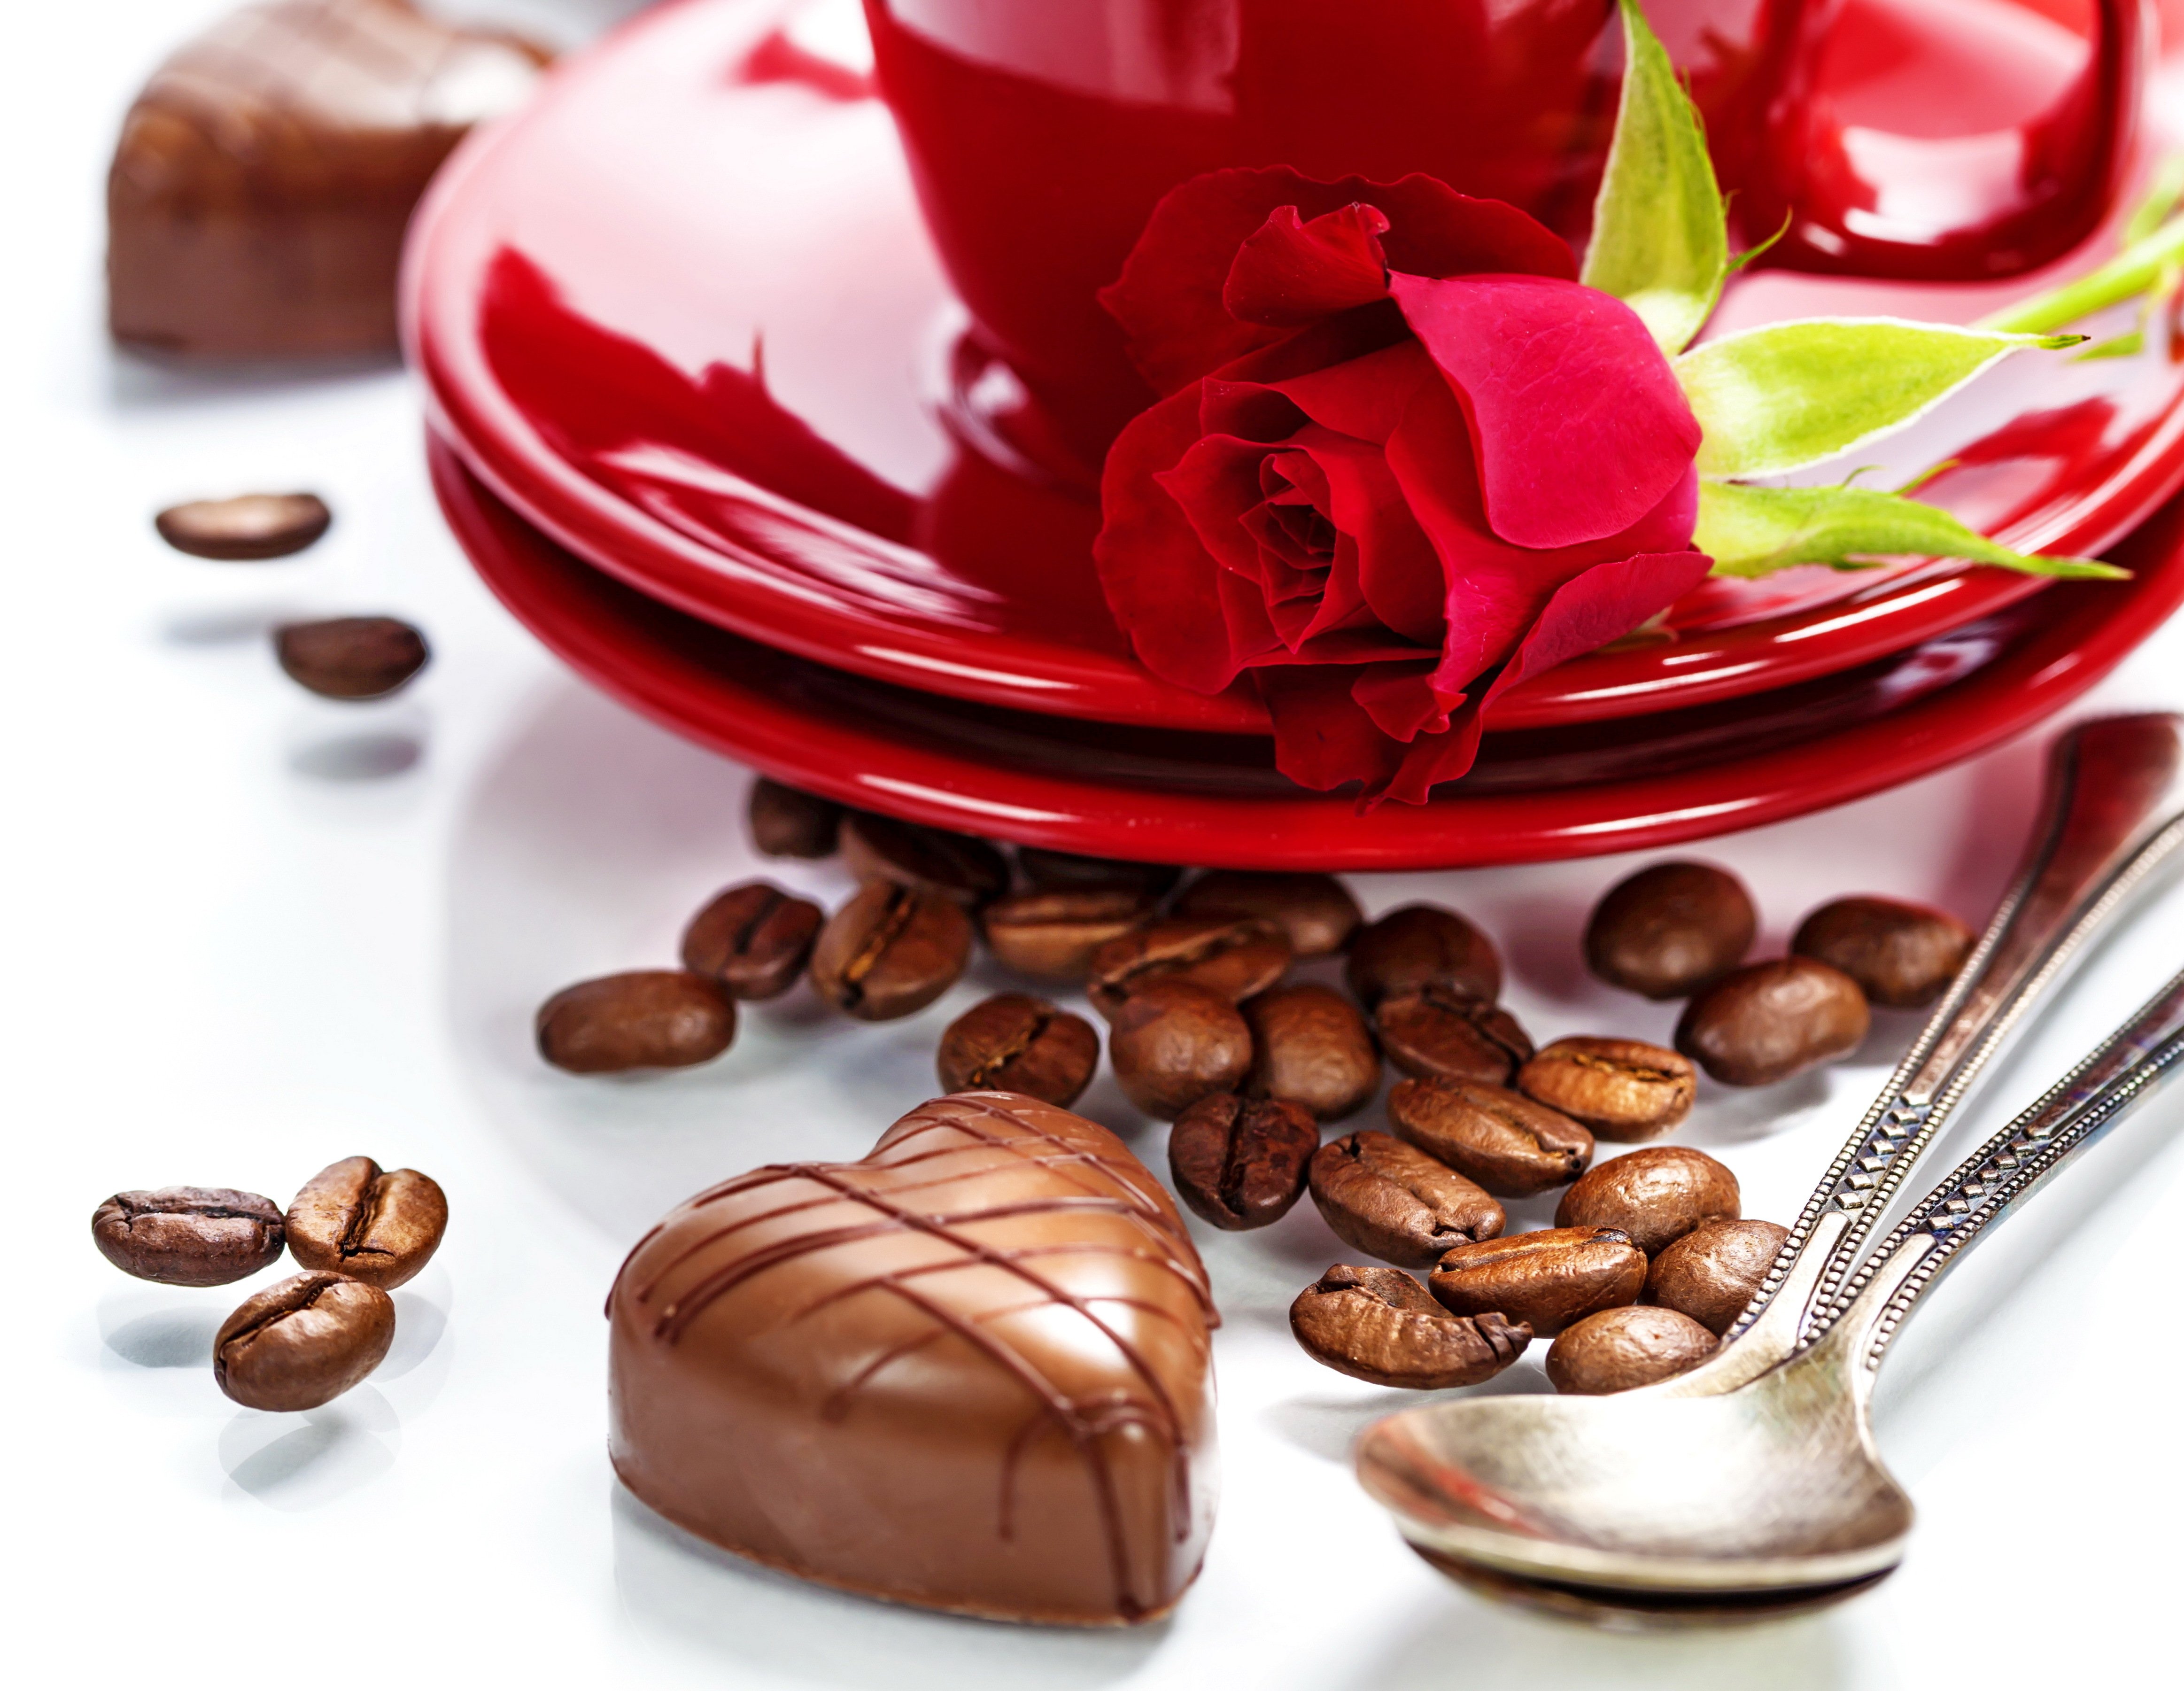 rose, Flowers, Coffee, Red, Love, Romance, Life, For, Chocolate, Gift, Couple Wallpaper